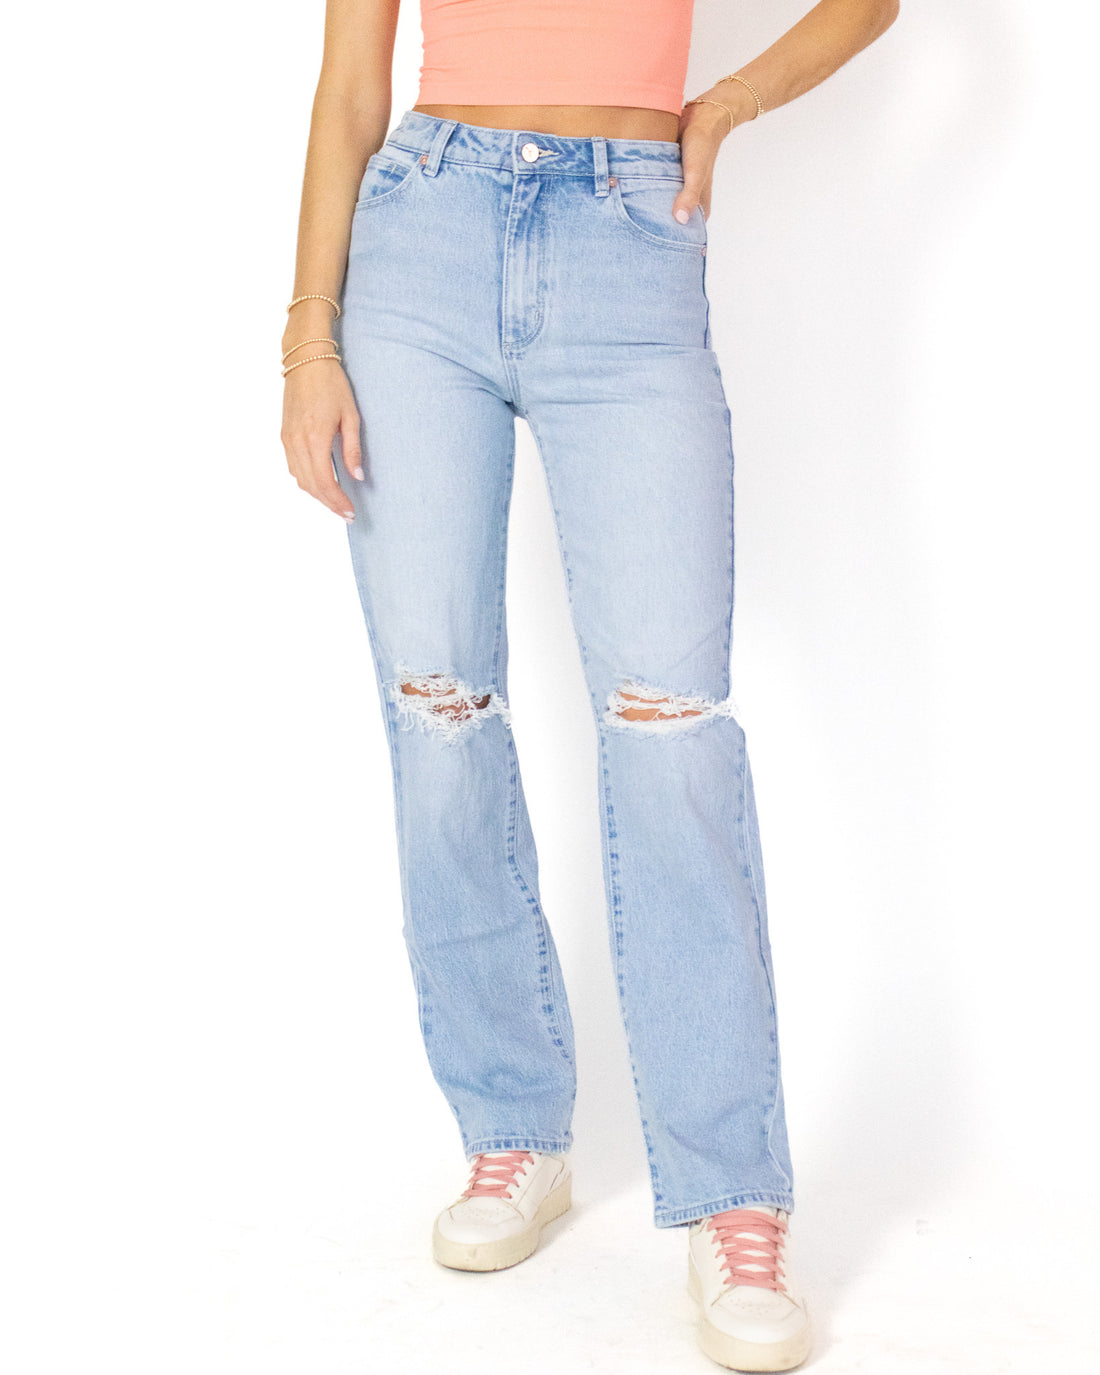 Gina Distressed Jeans